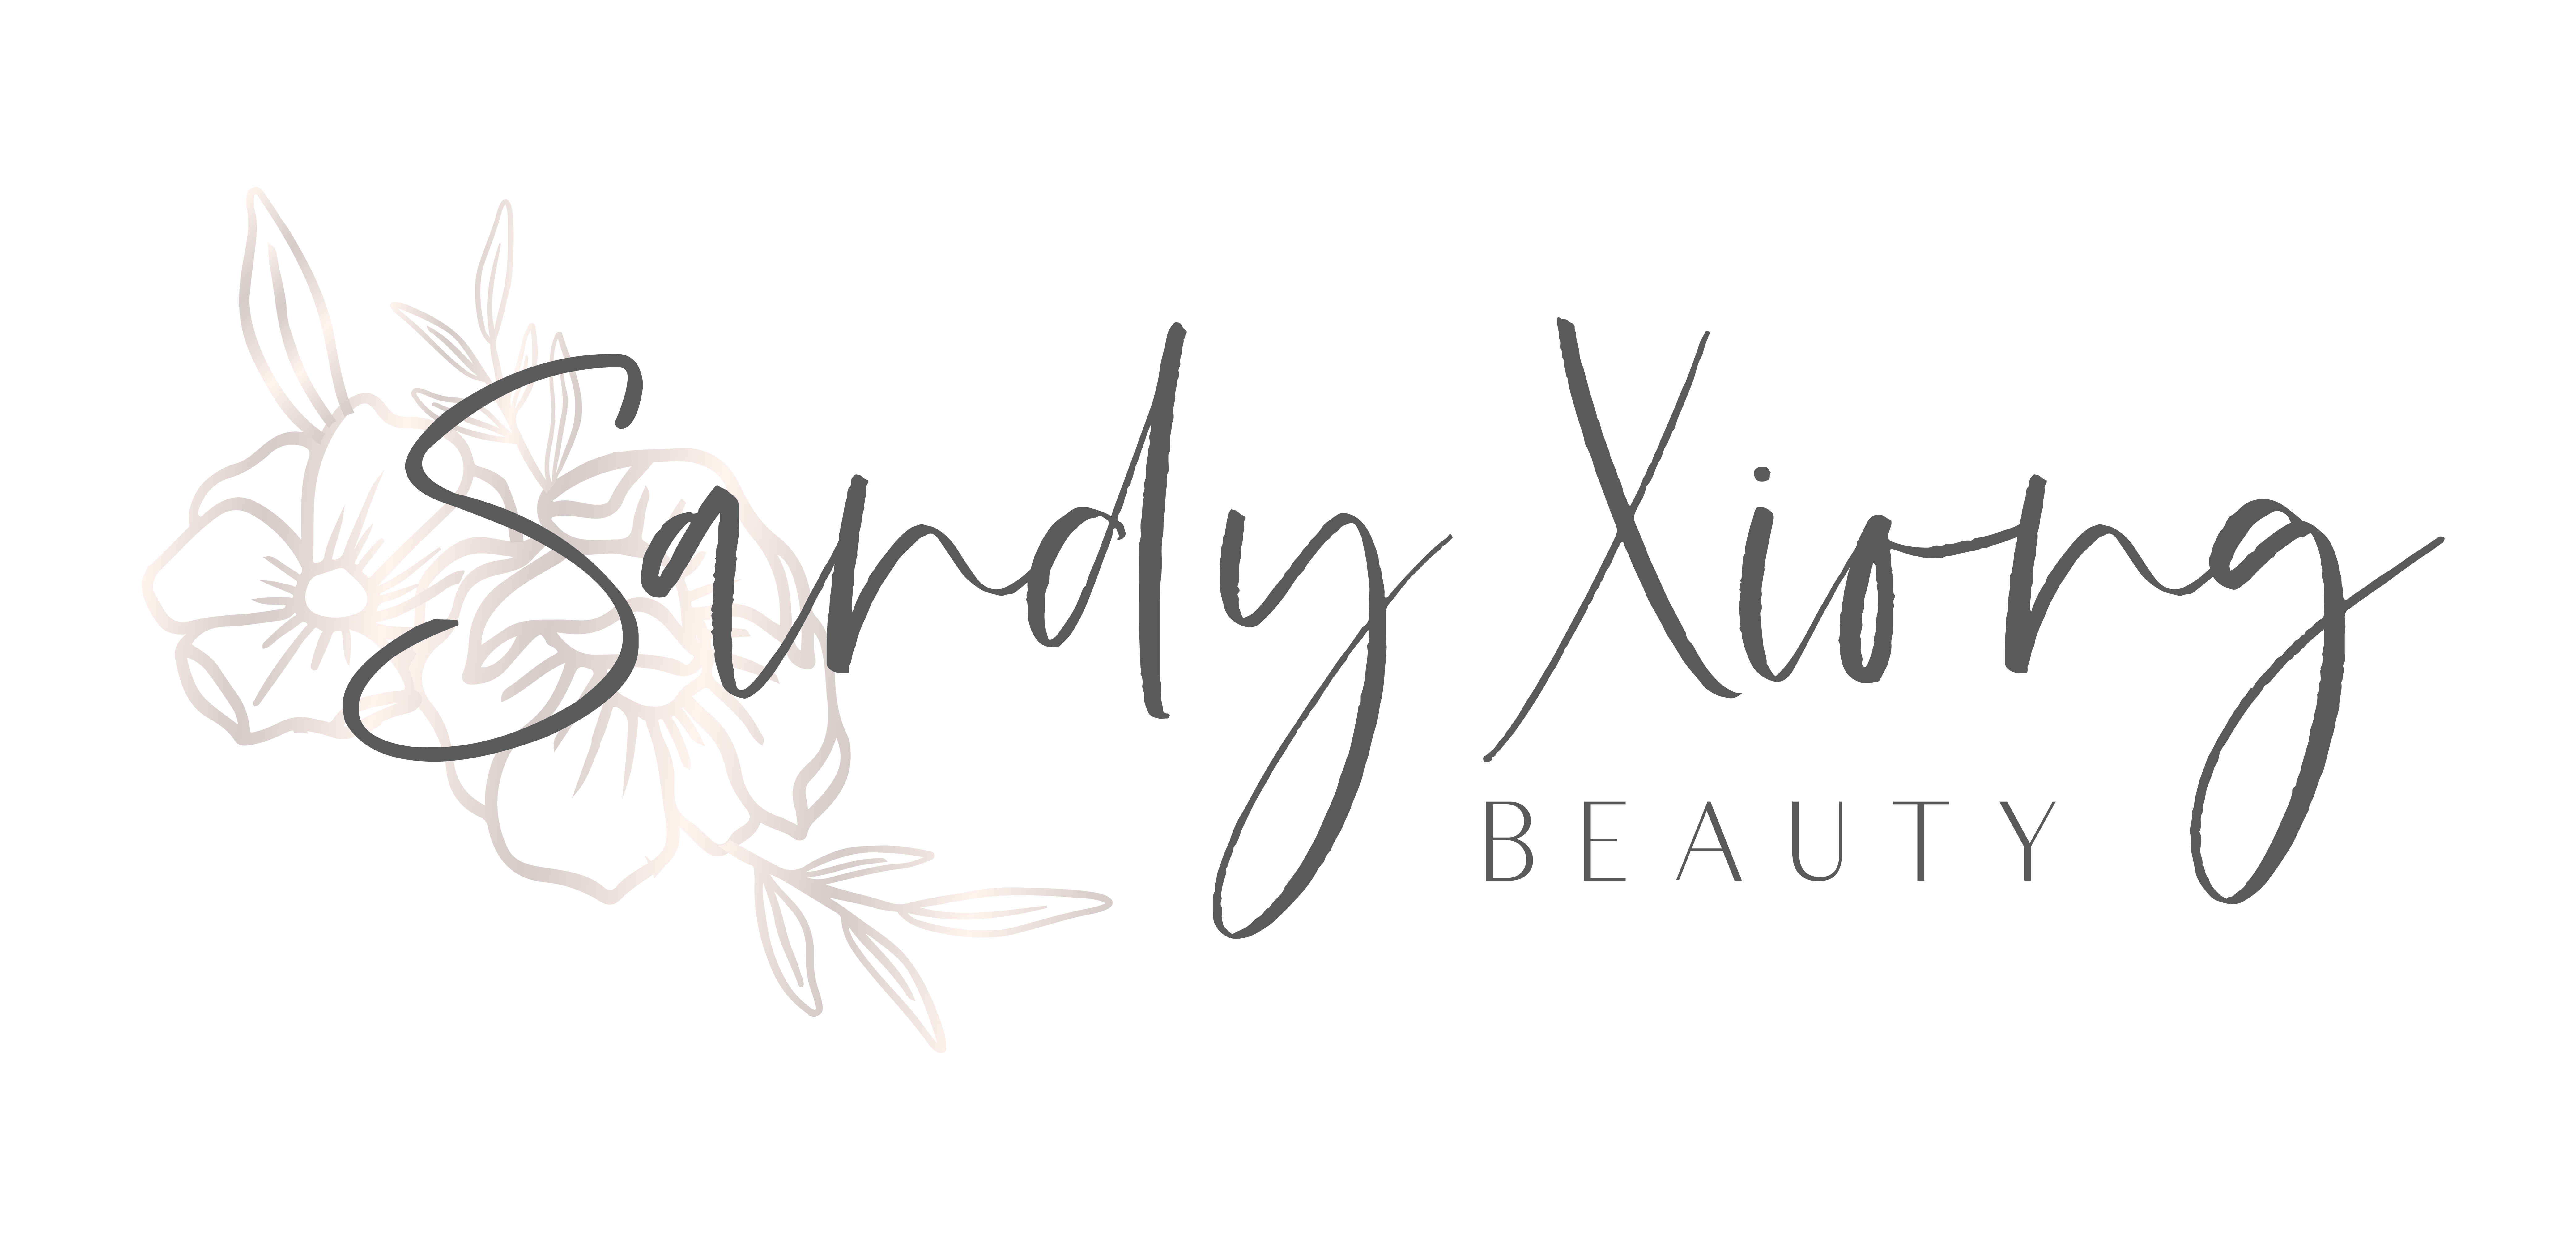 Sandy Xiong Beauty | Beauty - The Knot